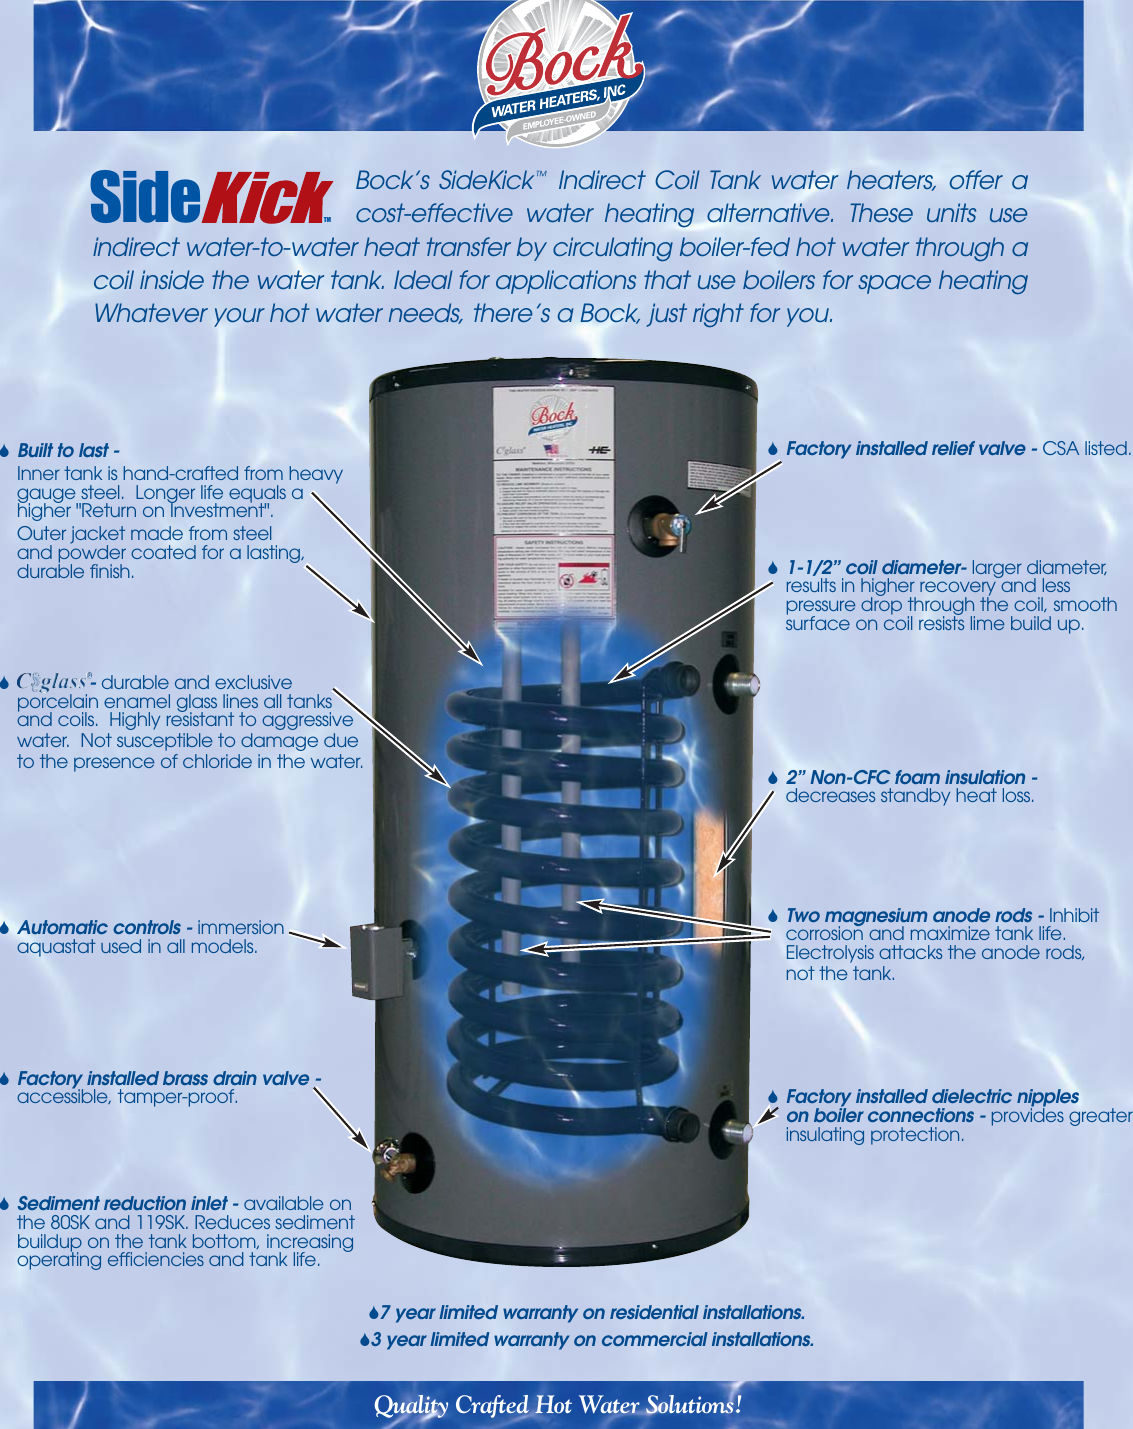 Page 1 of 2 - Bock-Water-Heaters Bock-Water-Heaters-Indirect-Coil-Tank-Water-Heater-Users-Manual- Sidekick Counter Card  Bock-water-heaters-indirect-coil-tank-water-heater-users-manual